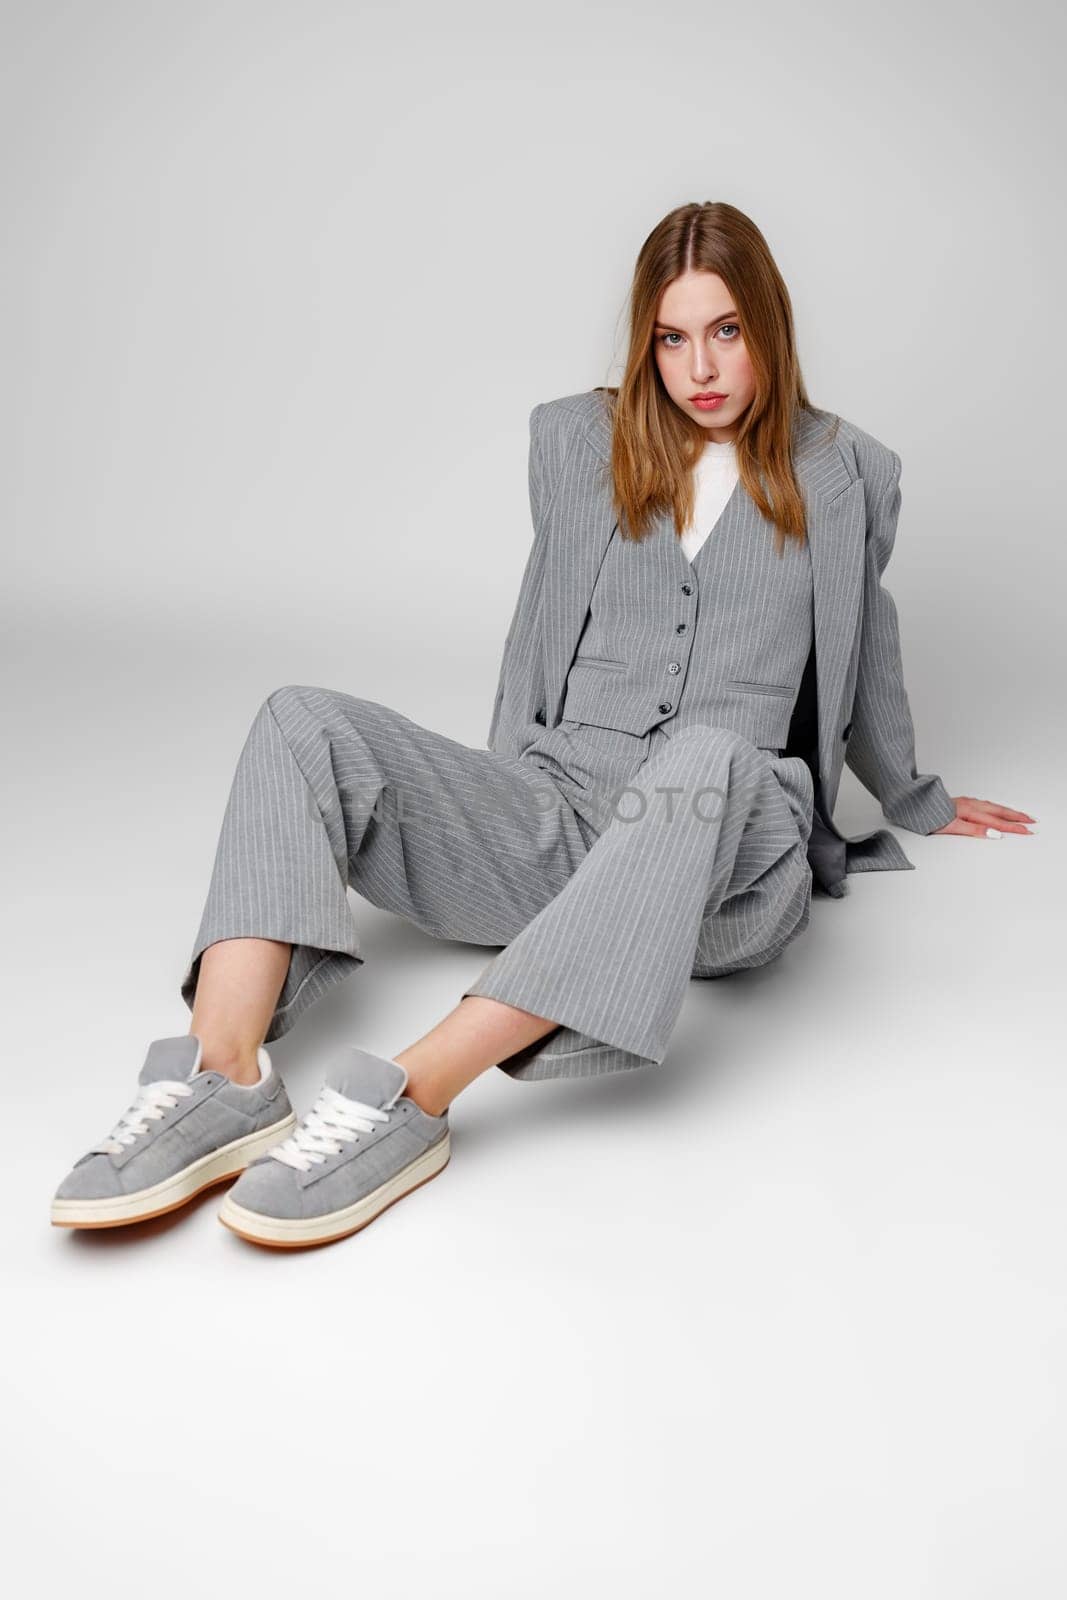 Young Woman in a Gray Suit Sitting on the Floor in Studio by Fabrikasimf